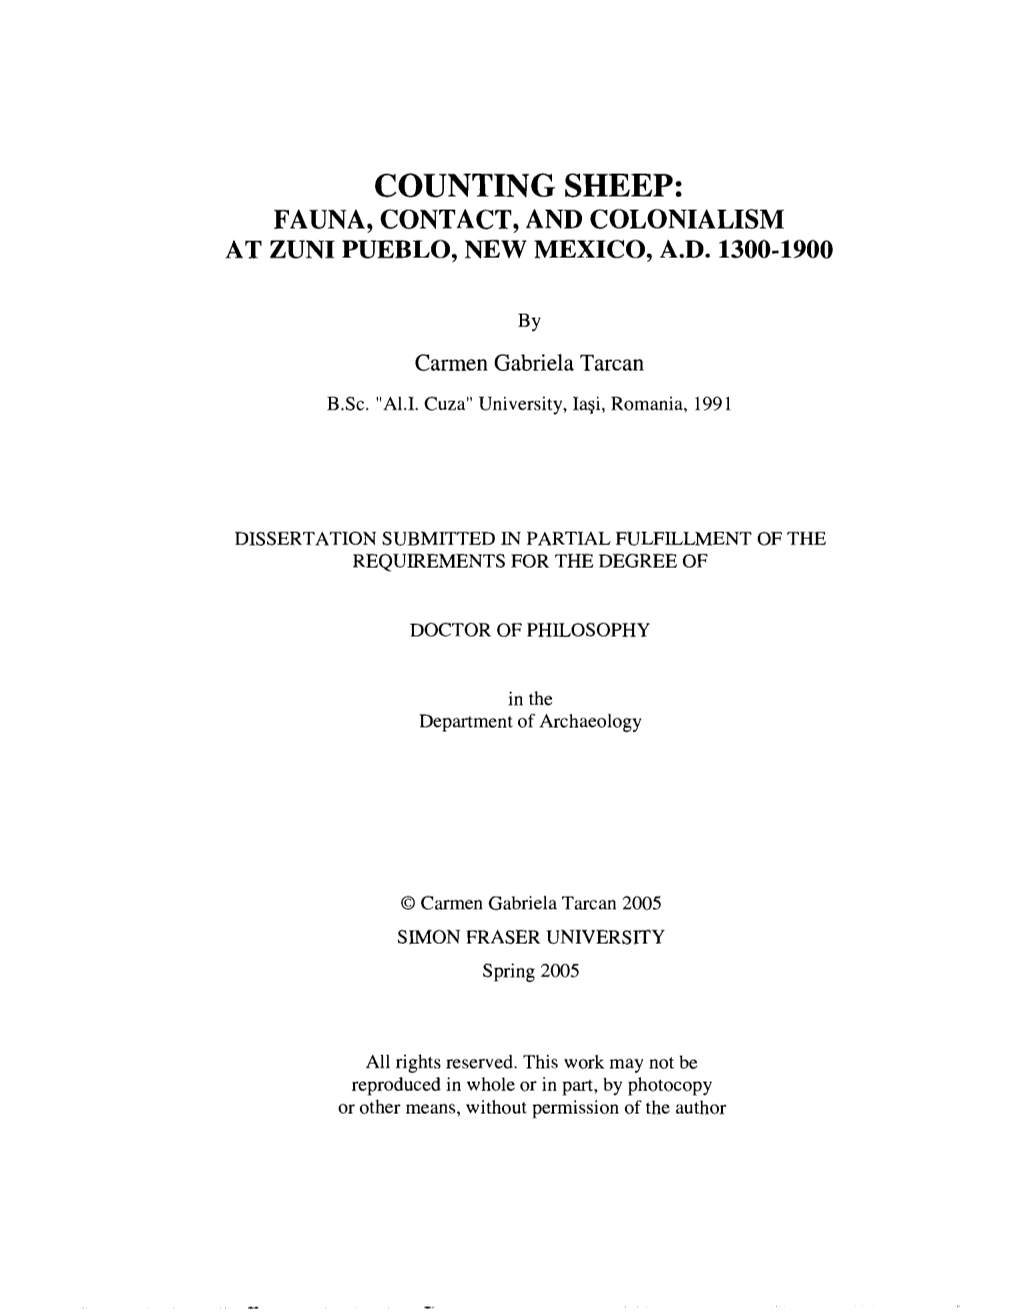 Counting Sheep: Fauna, Contact, and Colonialism at Zuni Pueblo, New Mexico, A.D